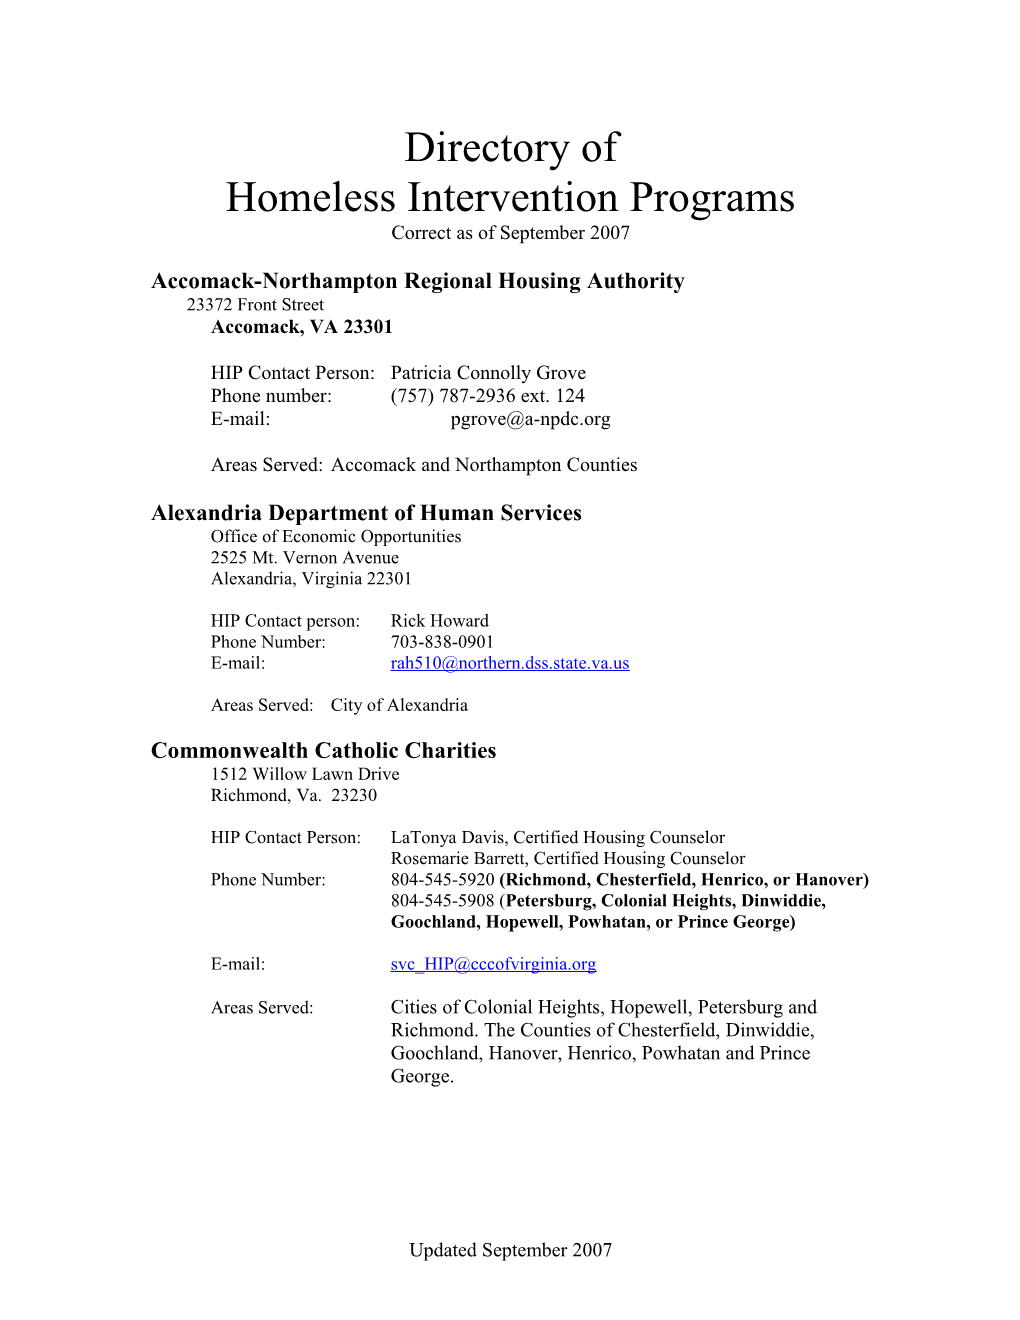 Directory of SHARE Homeless Intervention Programs